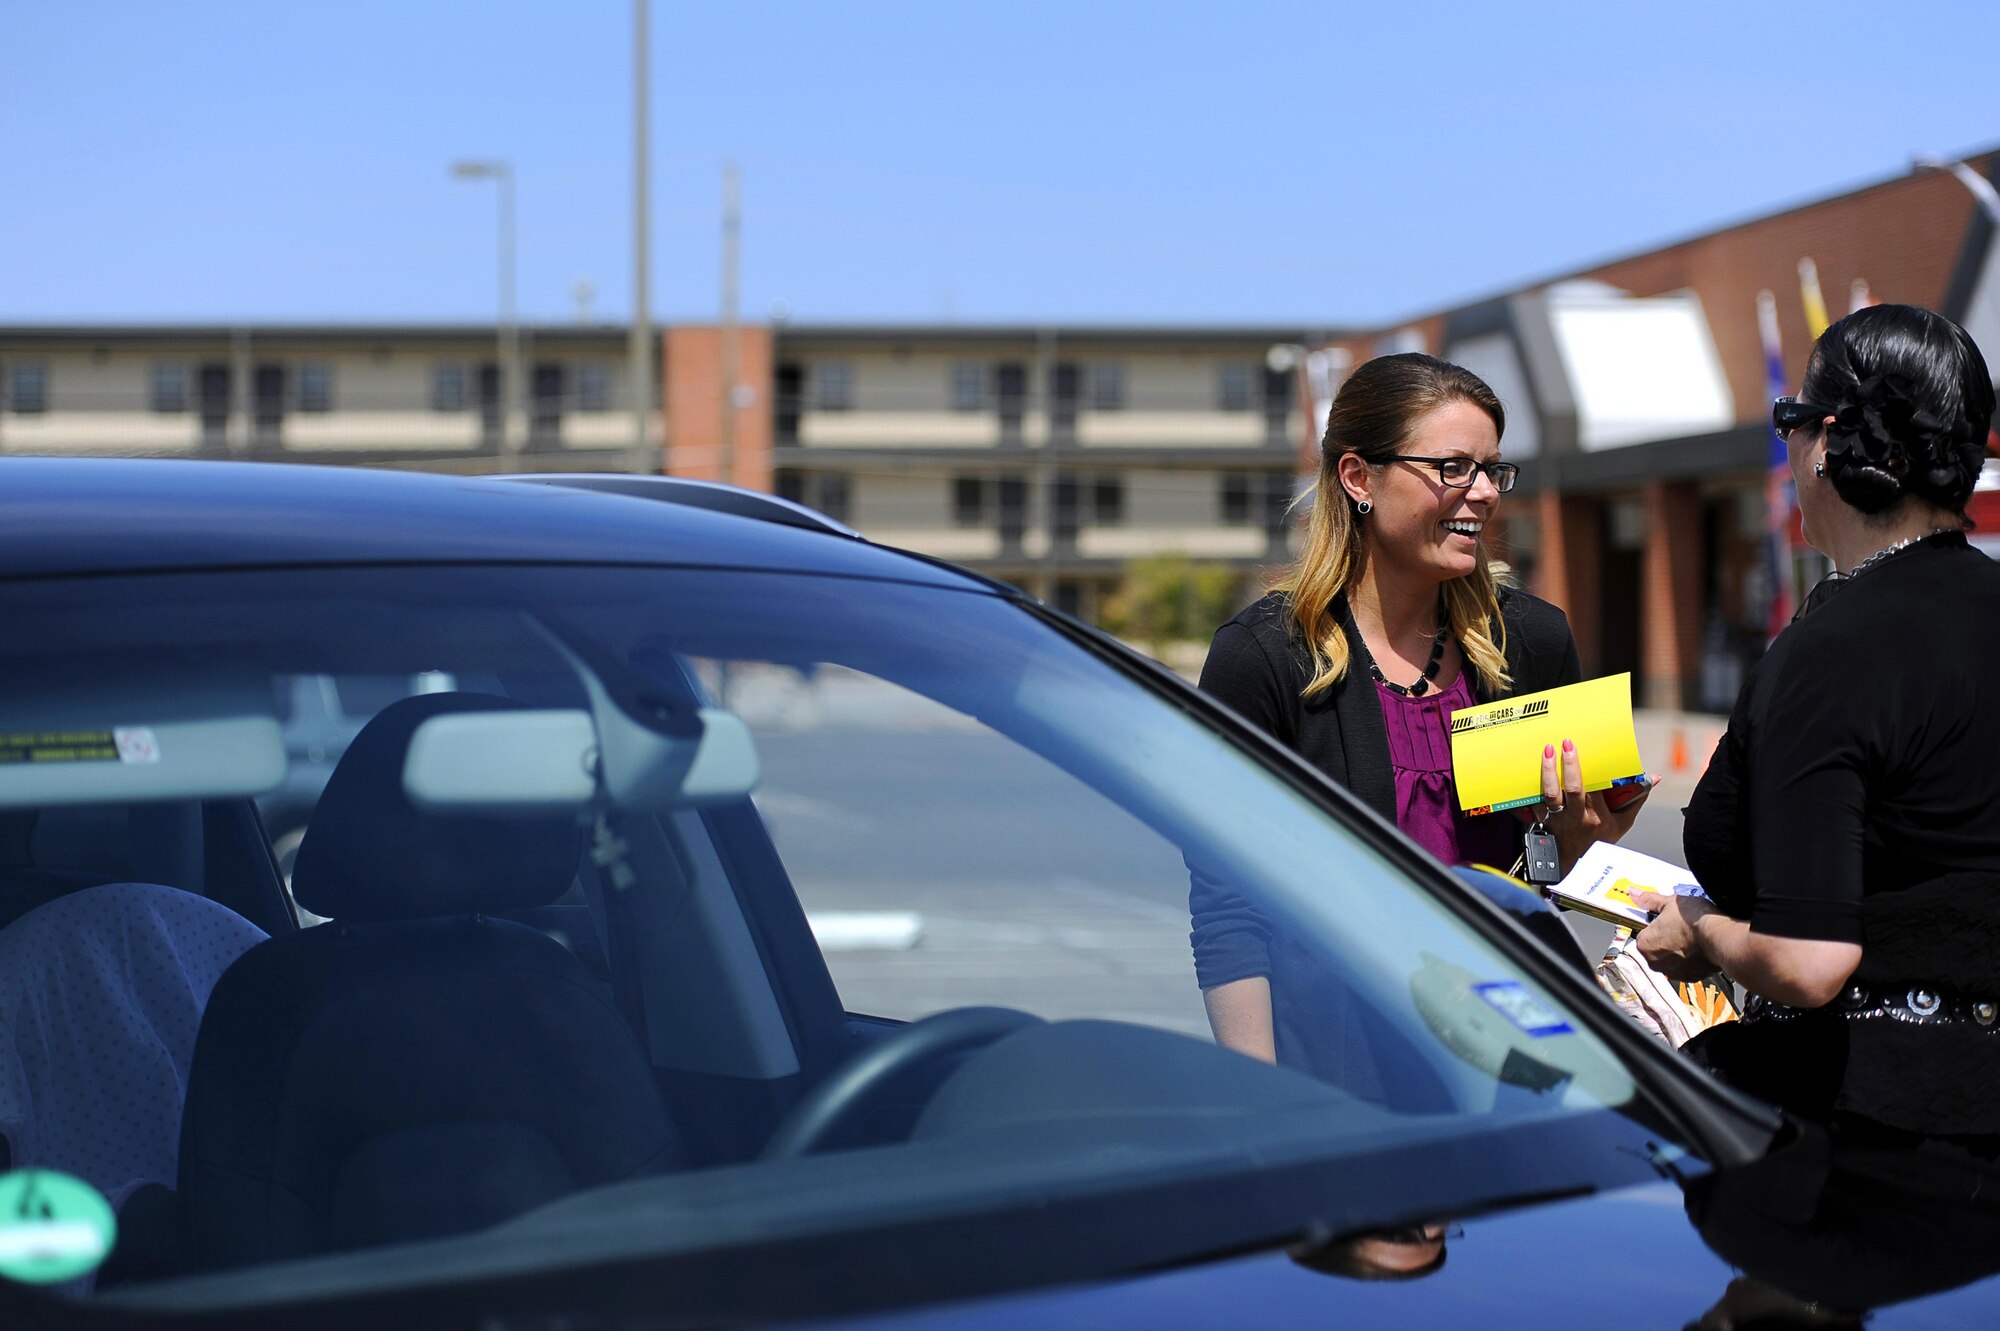 Cecilia Diaz, right, 17th Medical Group Family Advocacy Program manager, informs Michelle Brooks, 315th Training Squadron contractor, about the dangers of leaving children in unattended cars during a social experiment in the commissary parking lot on Goodfellow Air Force Base, Texas, May 29, 2015. The Family Advocacy Program staged an infant decoy, left in an unattended vehicle, projecting a crying baby audio track to observe how people would respond. (U.S. Air Force photo by Tech. Sgt. Austin Knox/Released)